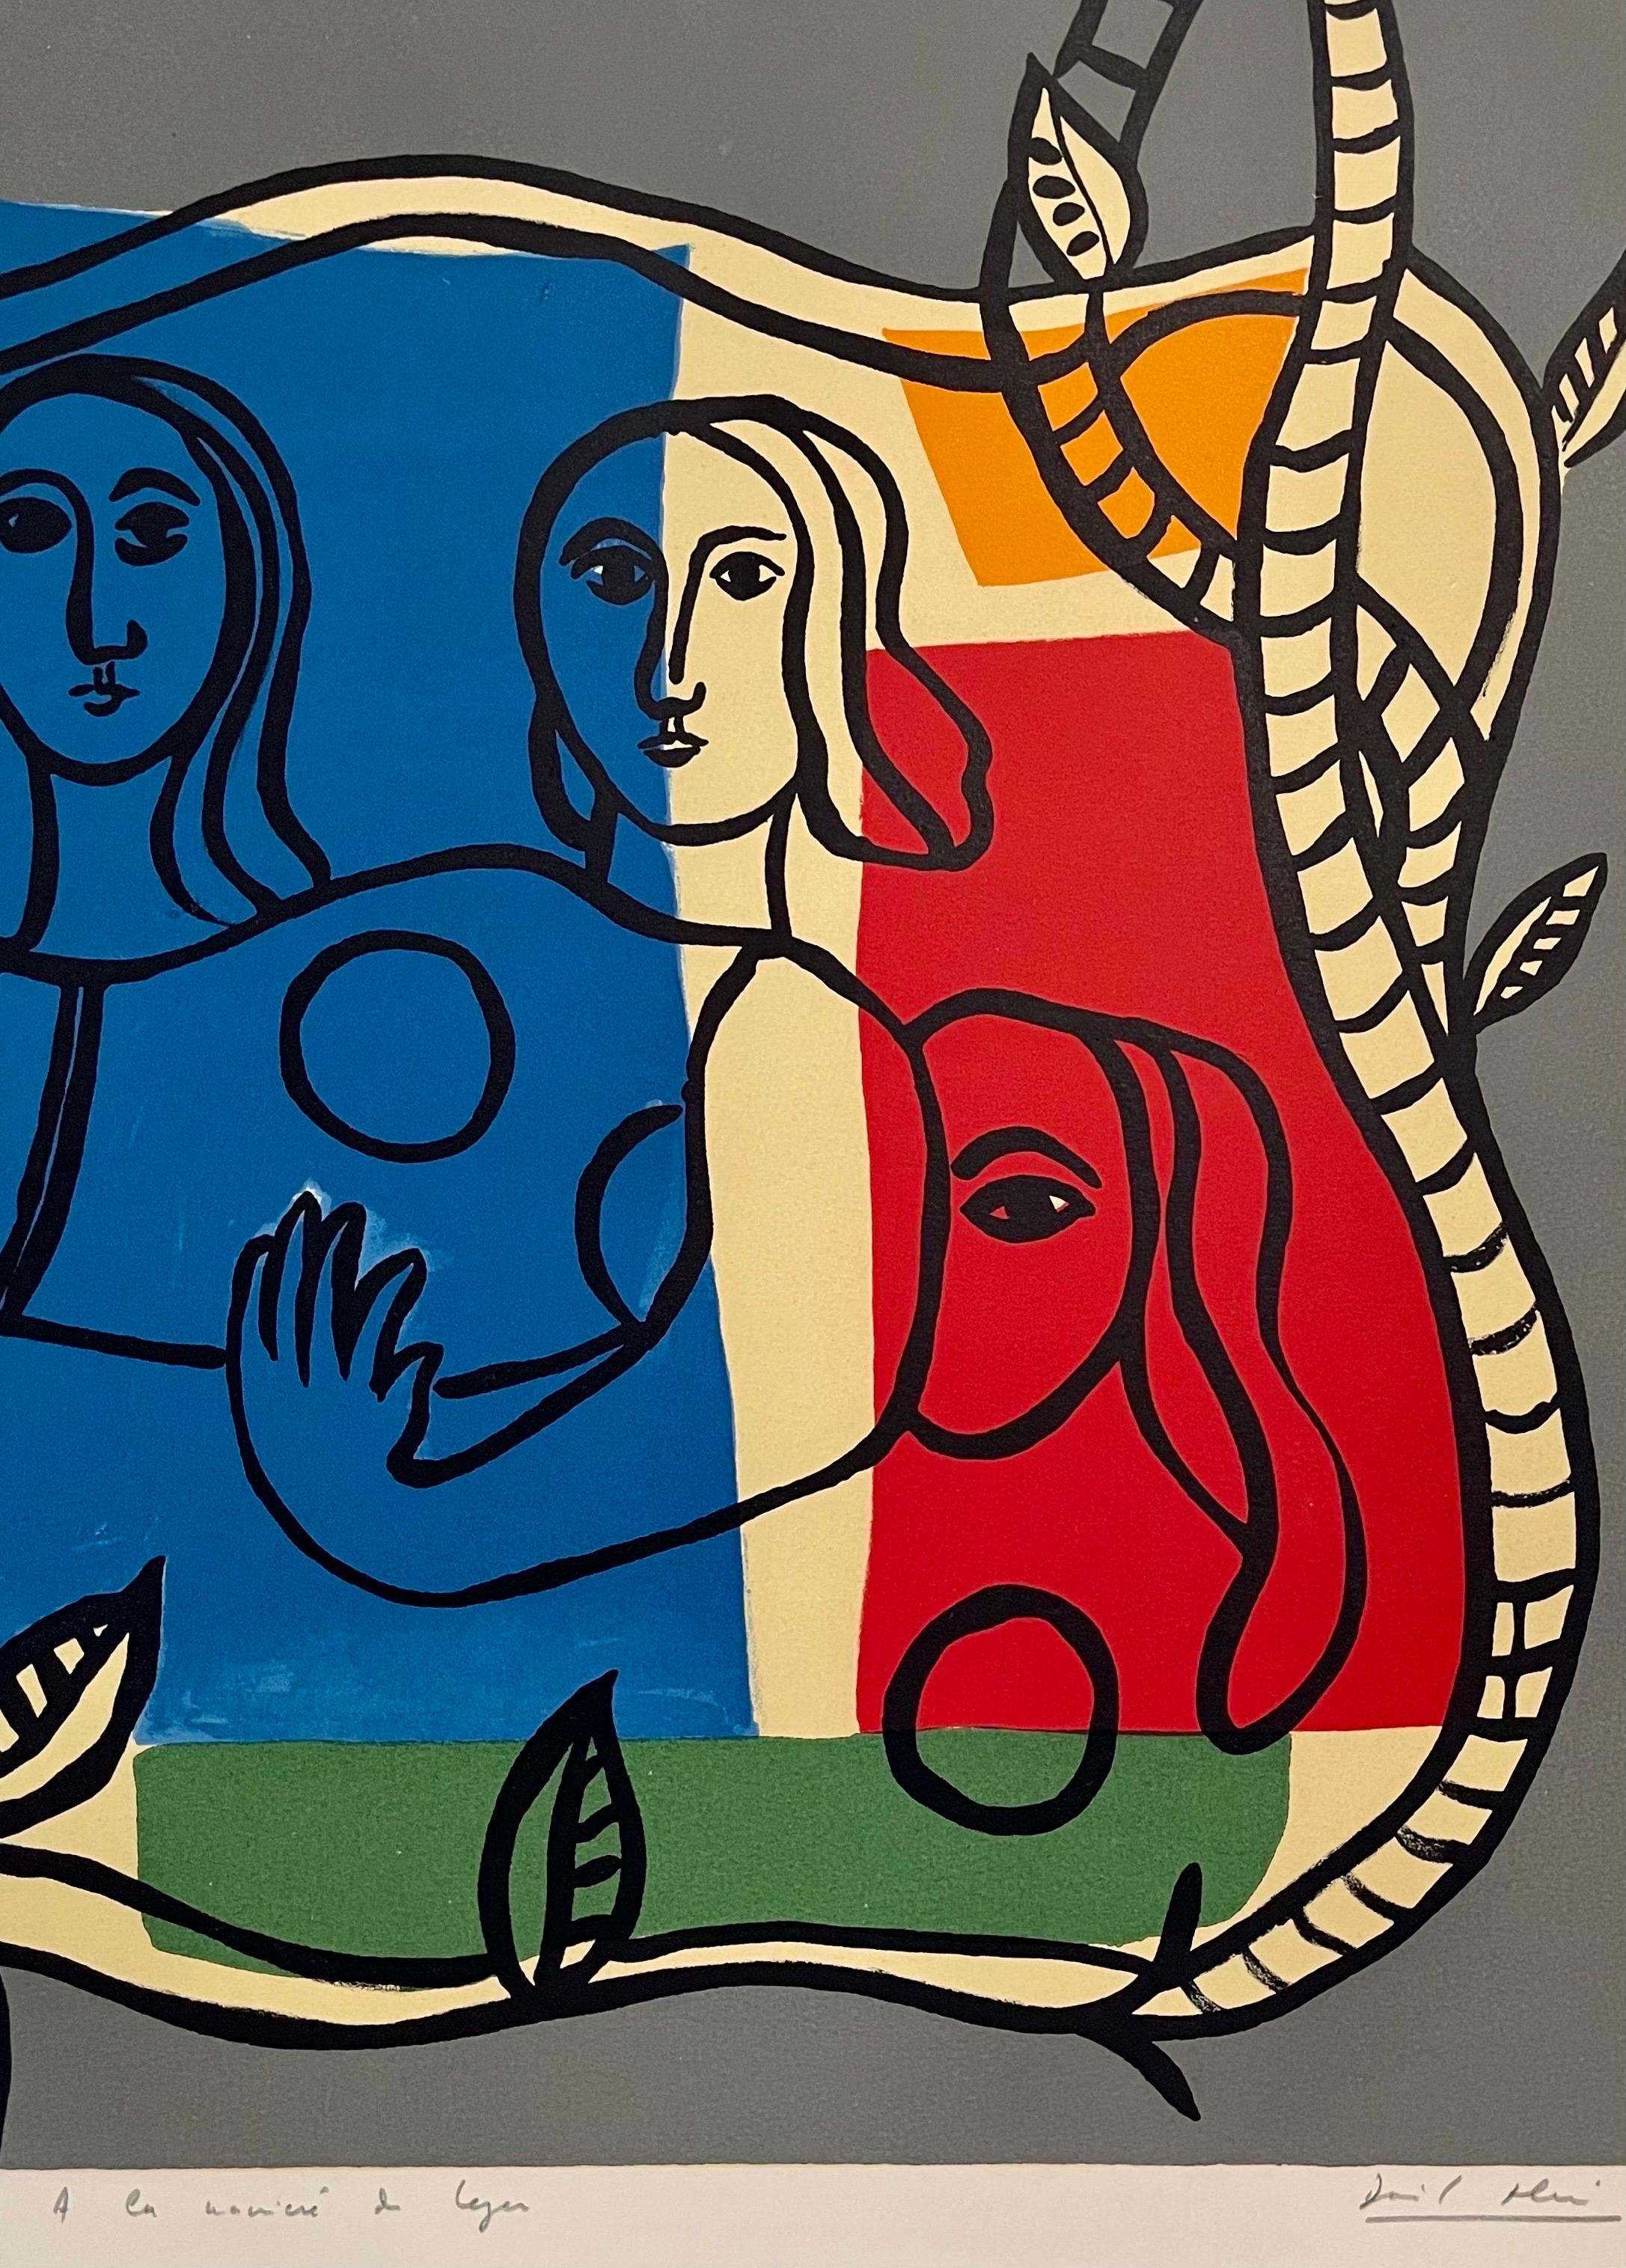 Apres Fernand Leger
Hand signed David Stein
Matted 29.5 X 26  image 23 X 19.5

David Stein (born Henri Haddad,  1935, Alexandria, Egypt – died 1999, Bordeaux, France) was an artist (notorious art forger)  who, until 1966, had been frequently